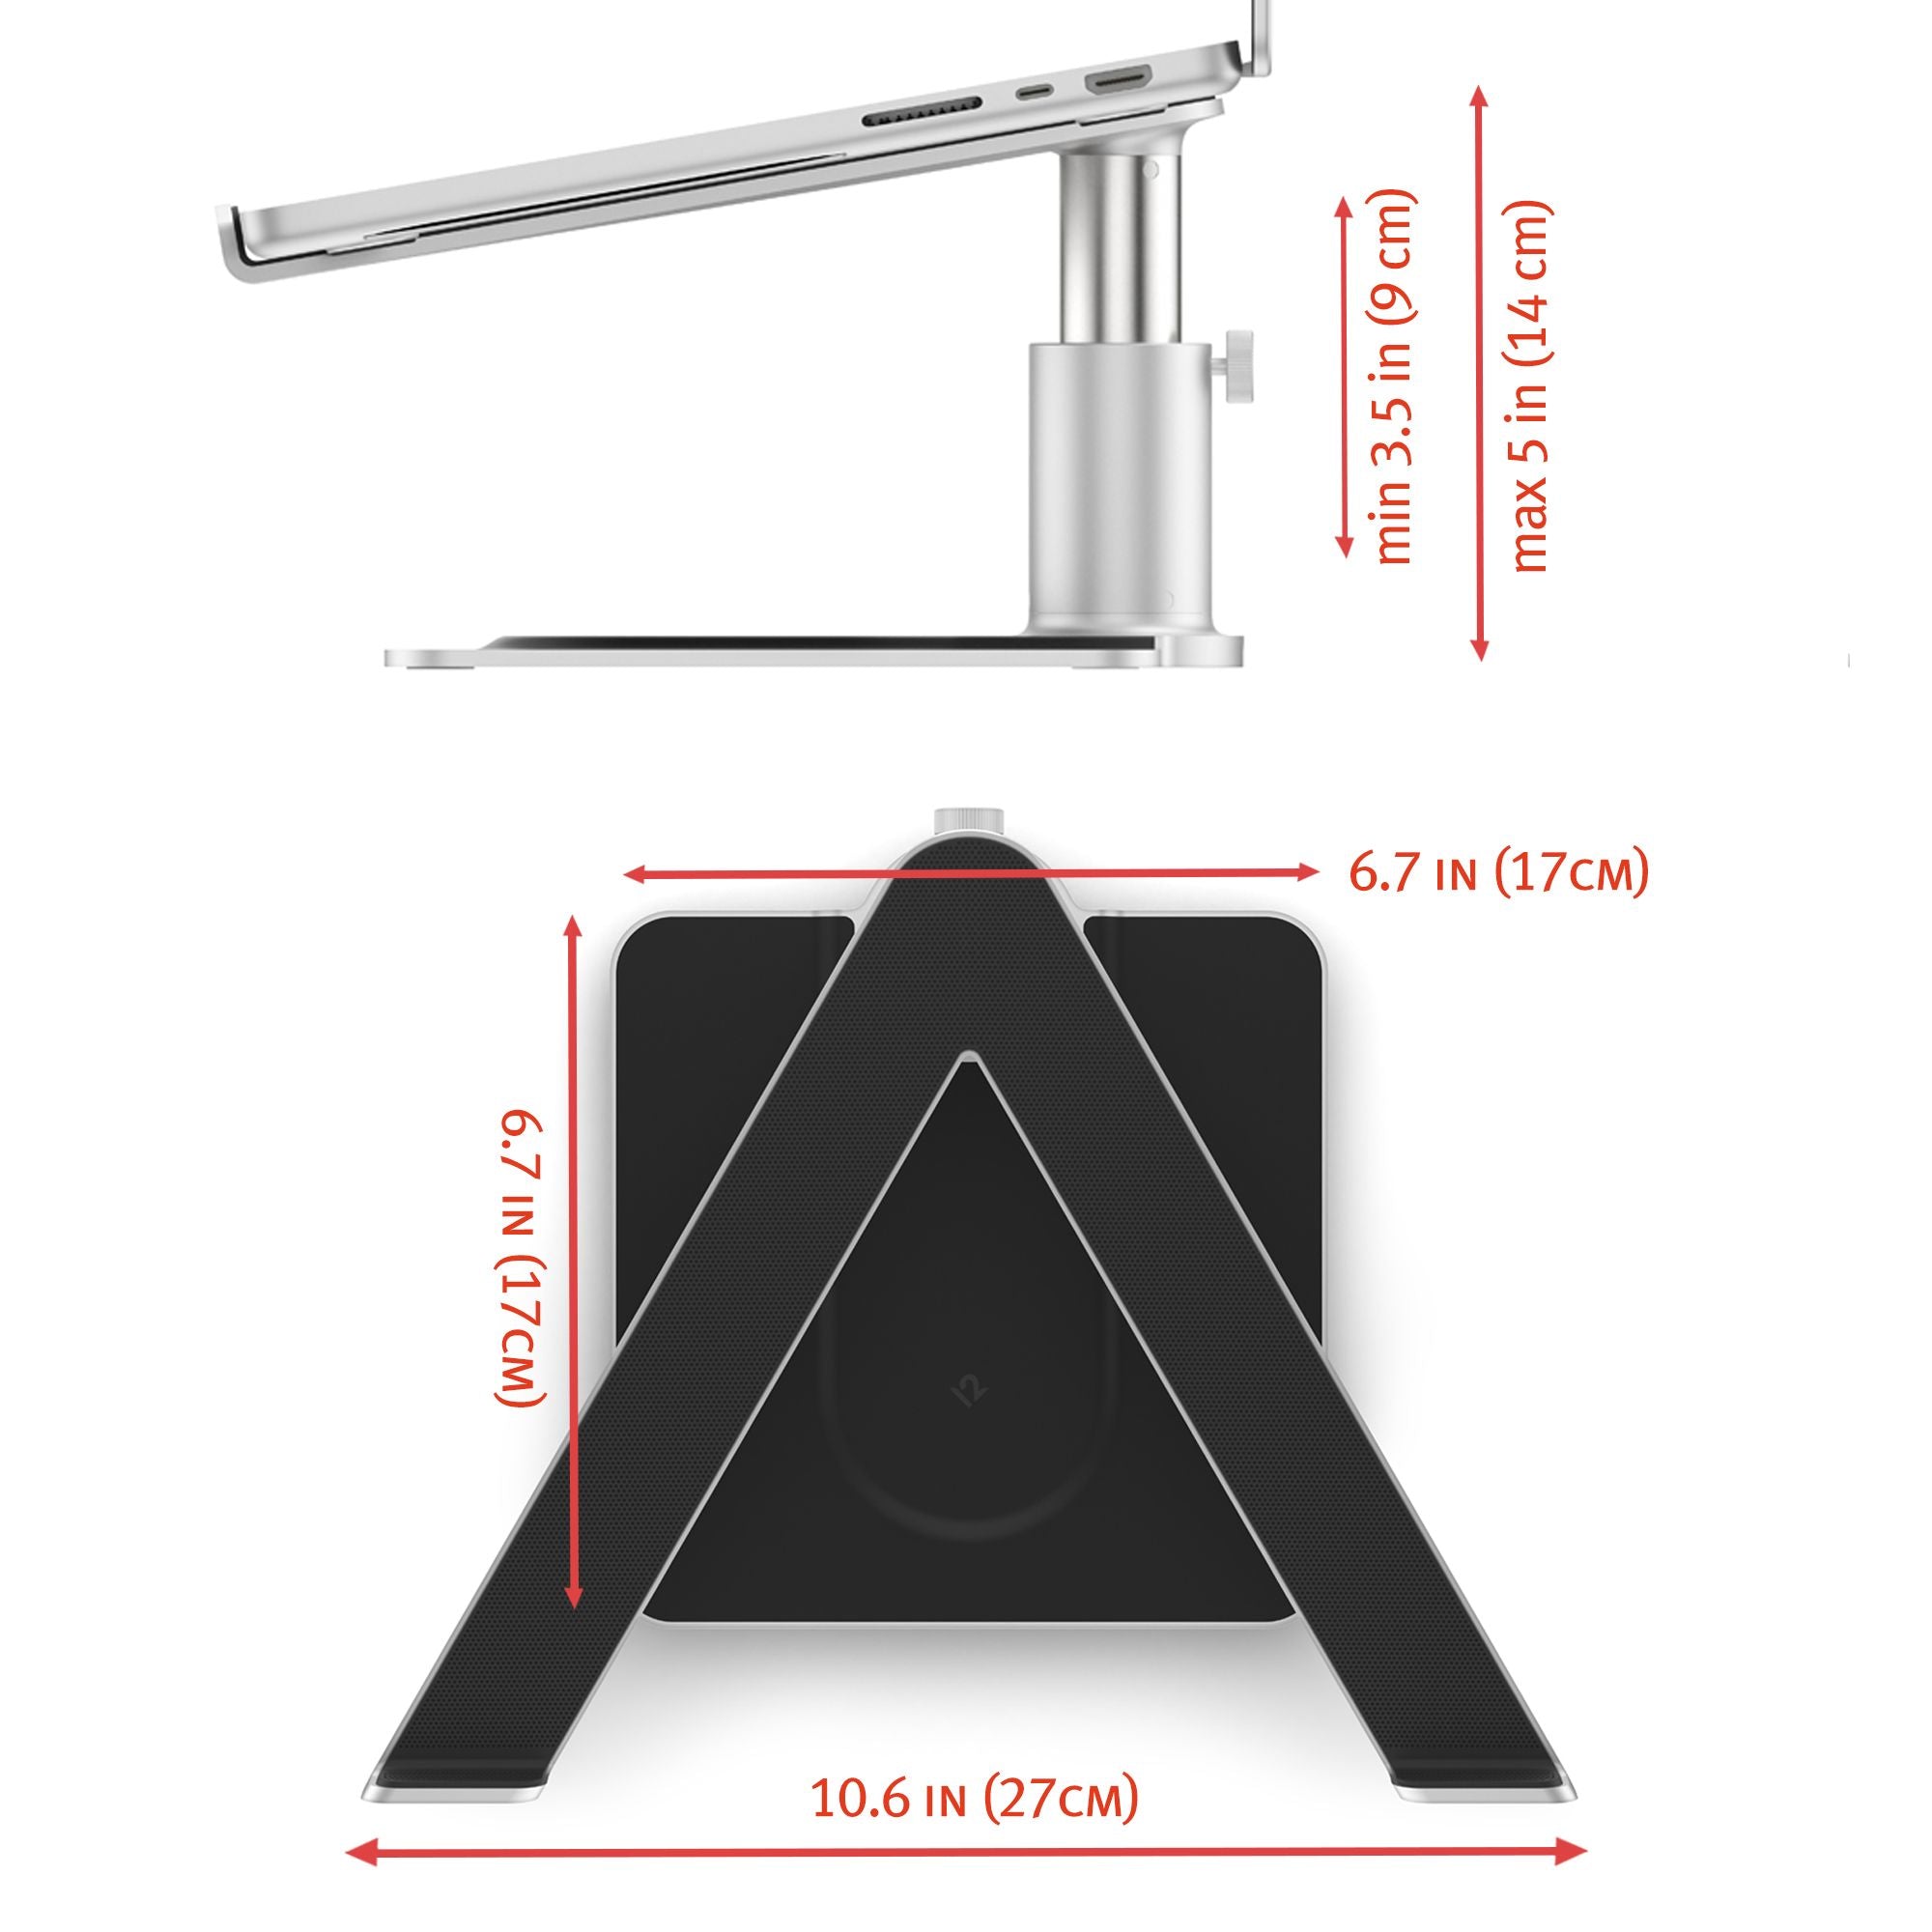 HiRise Pro for Laptops and MacBooks | Ergonomic, Height-Adjustable Stand with MagSafe / Wireless Capable Charging Base